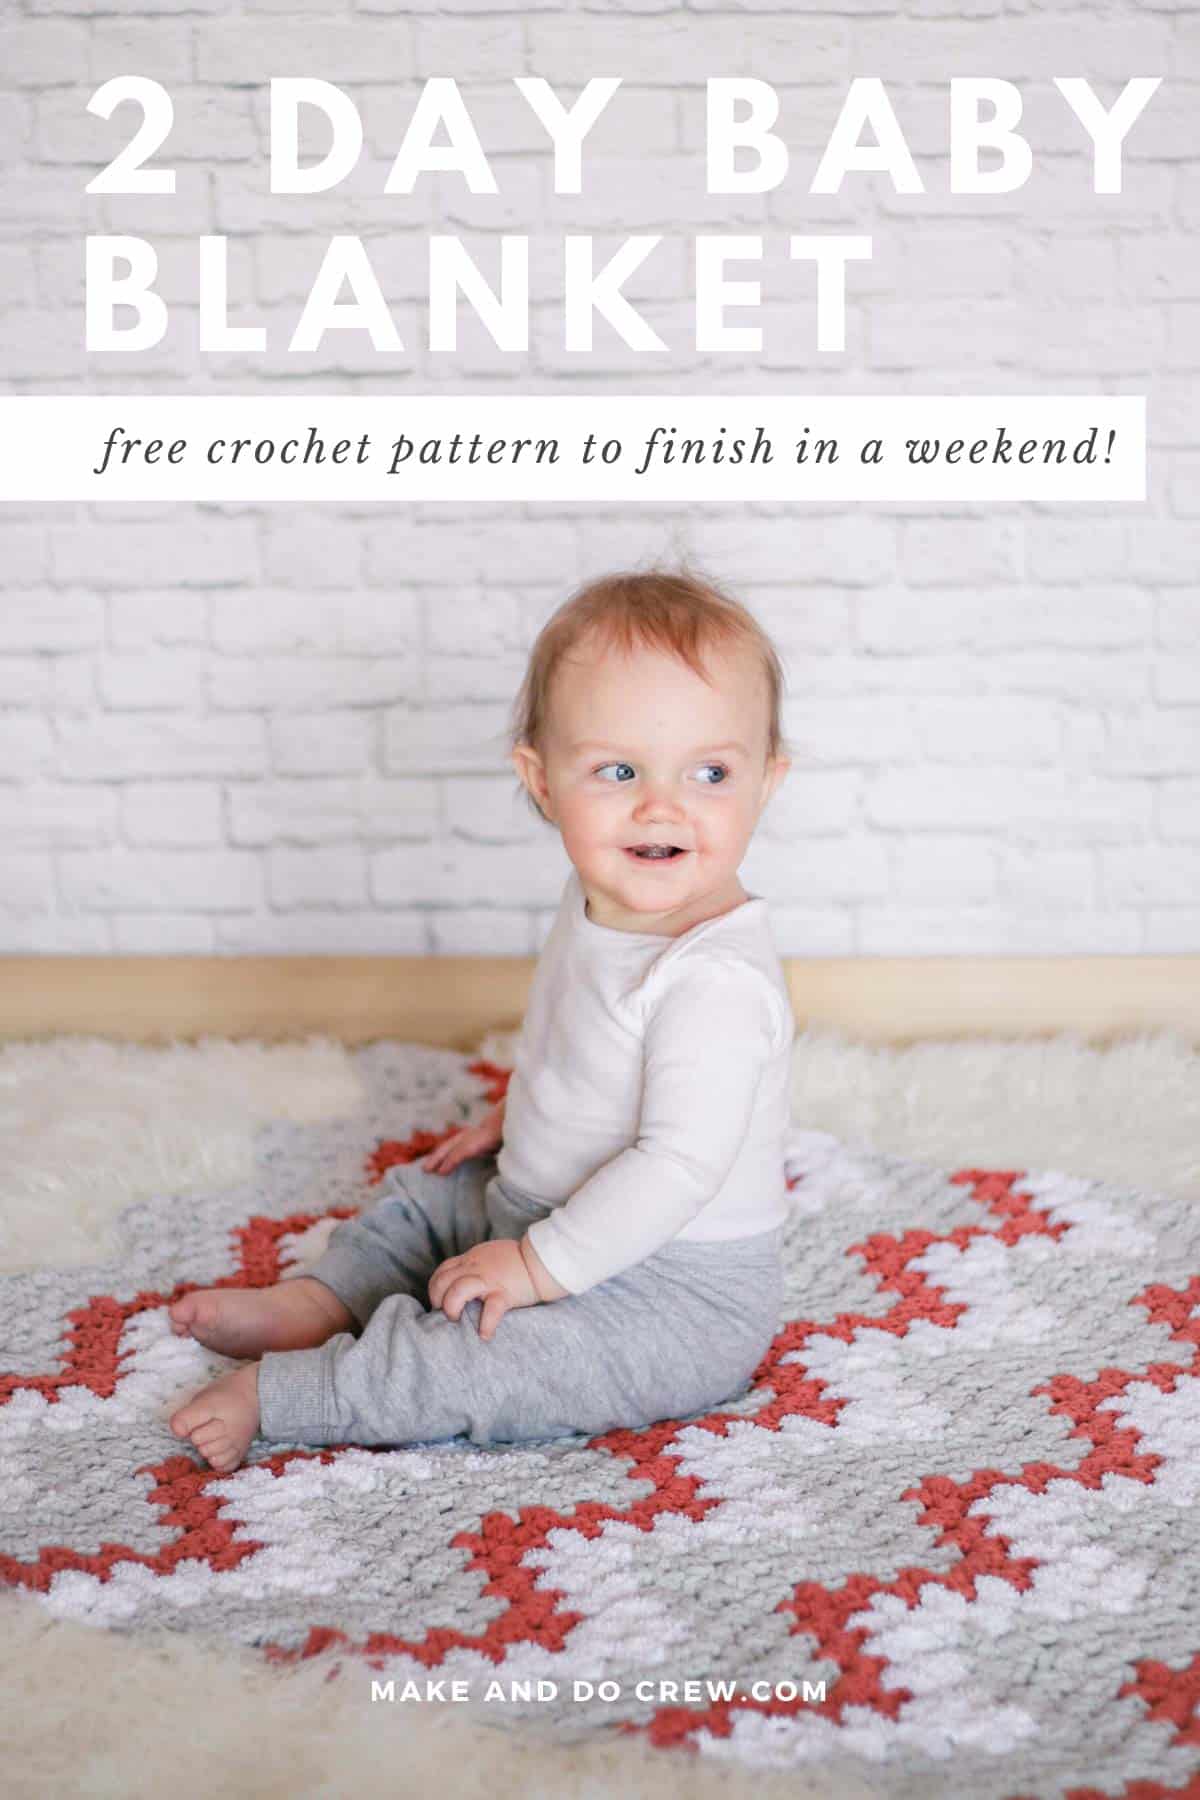 Adorable baby sitting on a easy crochet baby blanket made from a free crochet pattern using Lion Brand yarn.